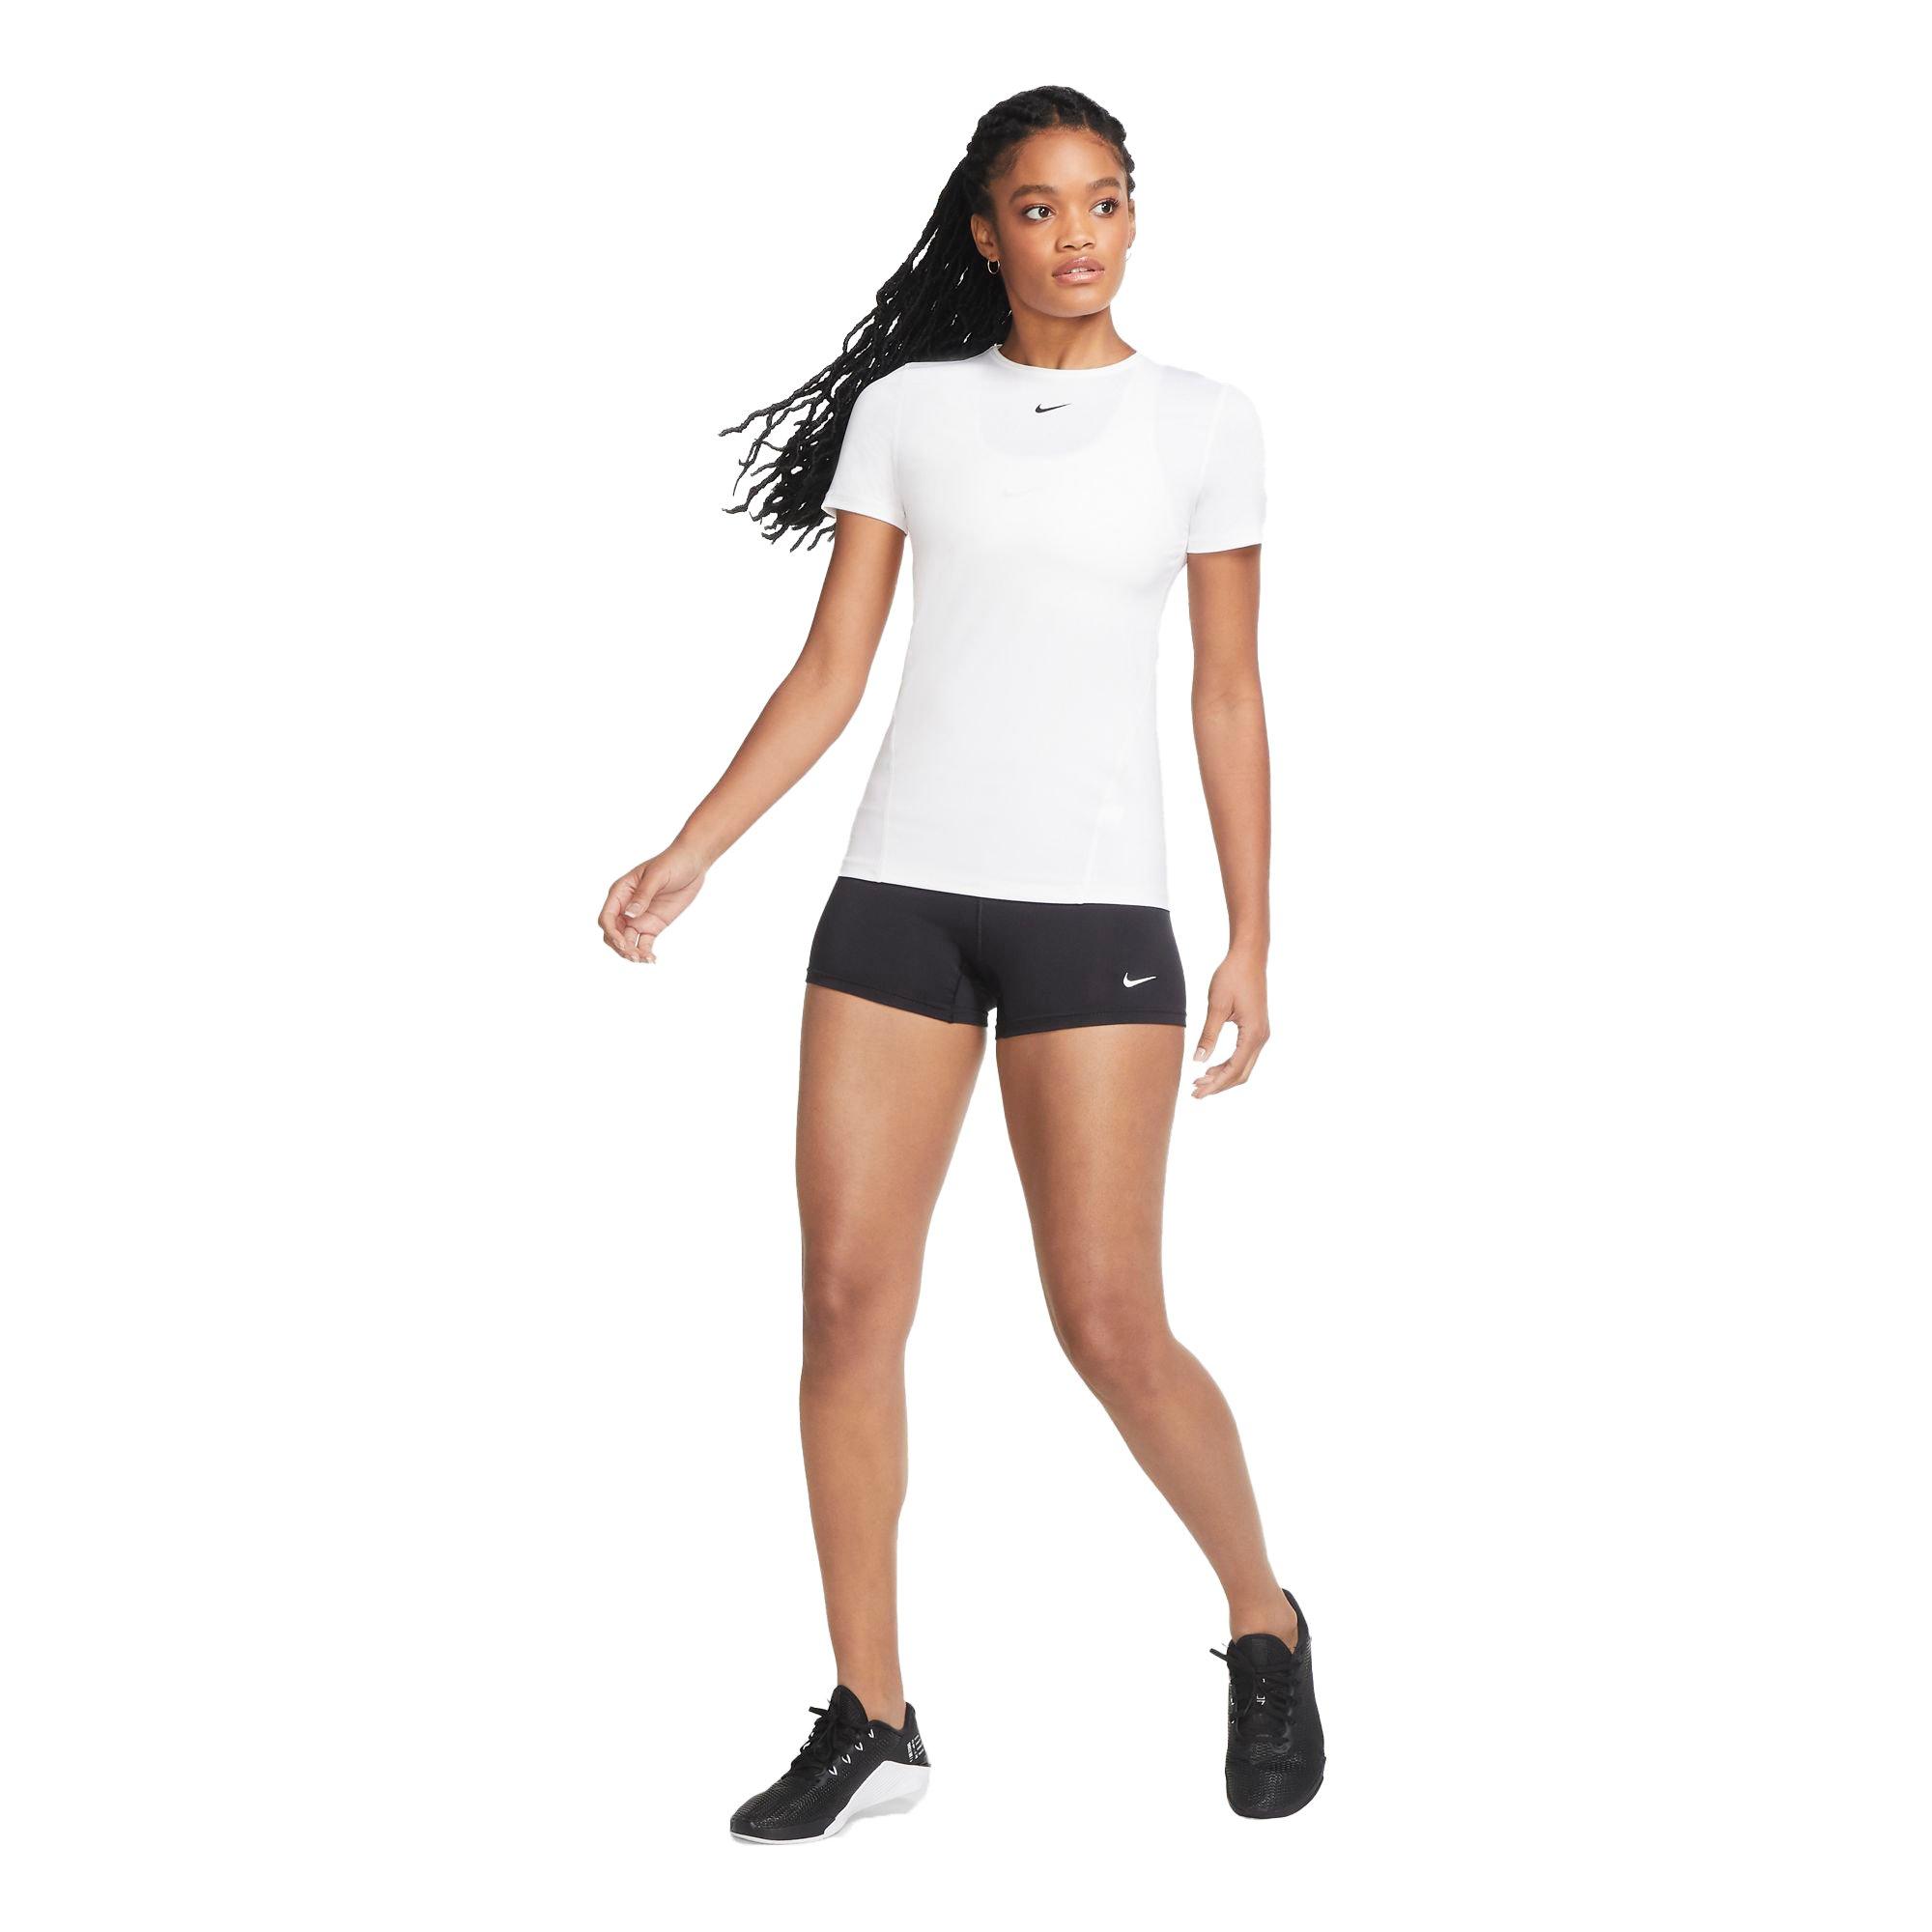 Women's Nike Performance Game Volleyball Short - Anthracite/White- Sma